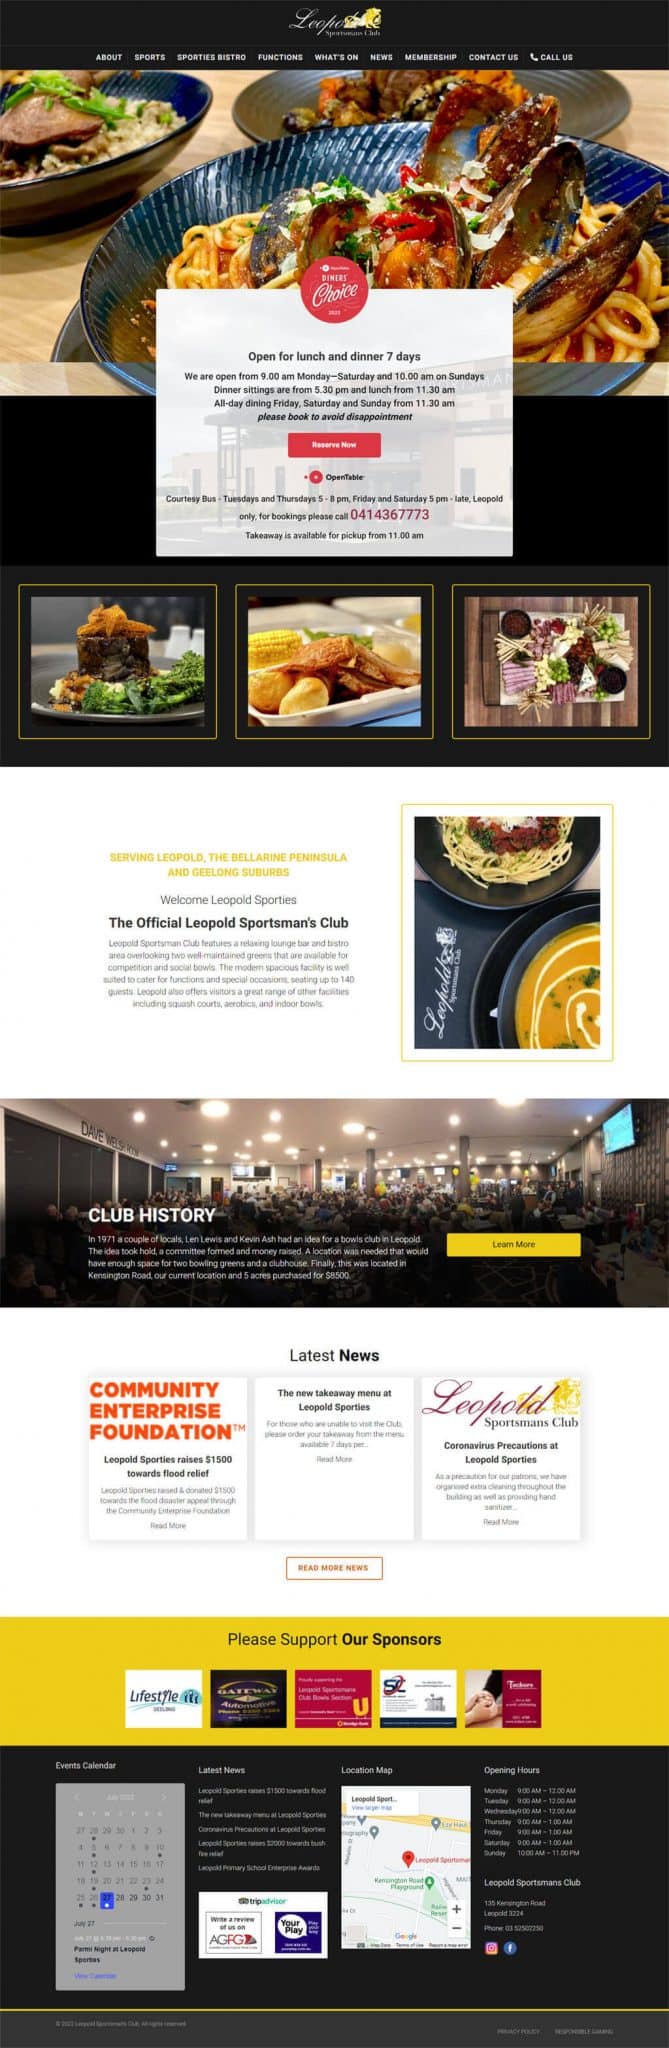 Website Designed for Leopold Sporties including SEO and Google Business Profile (Google Maps)